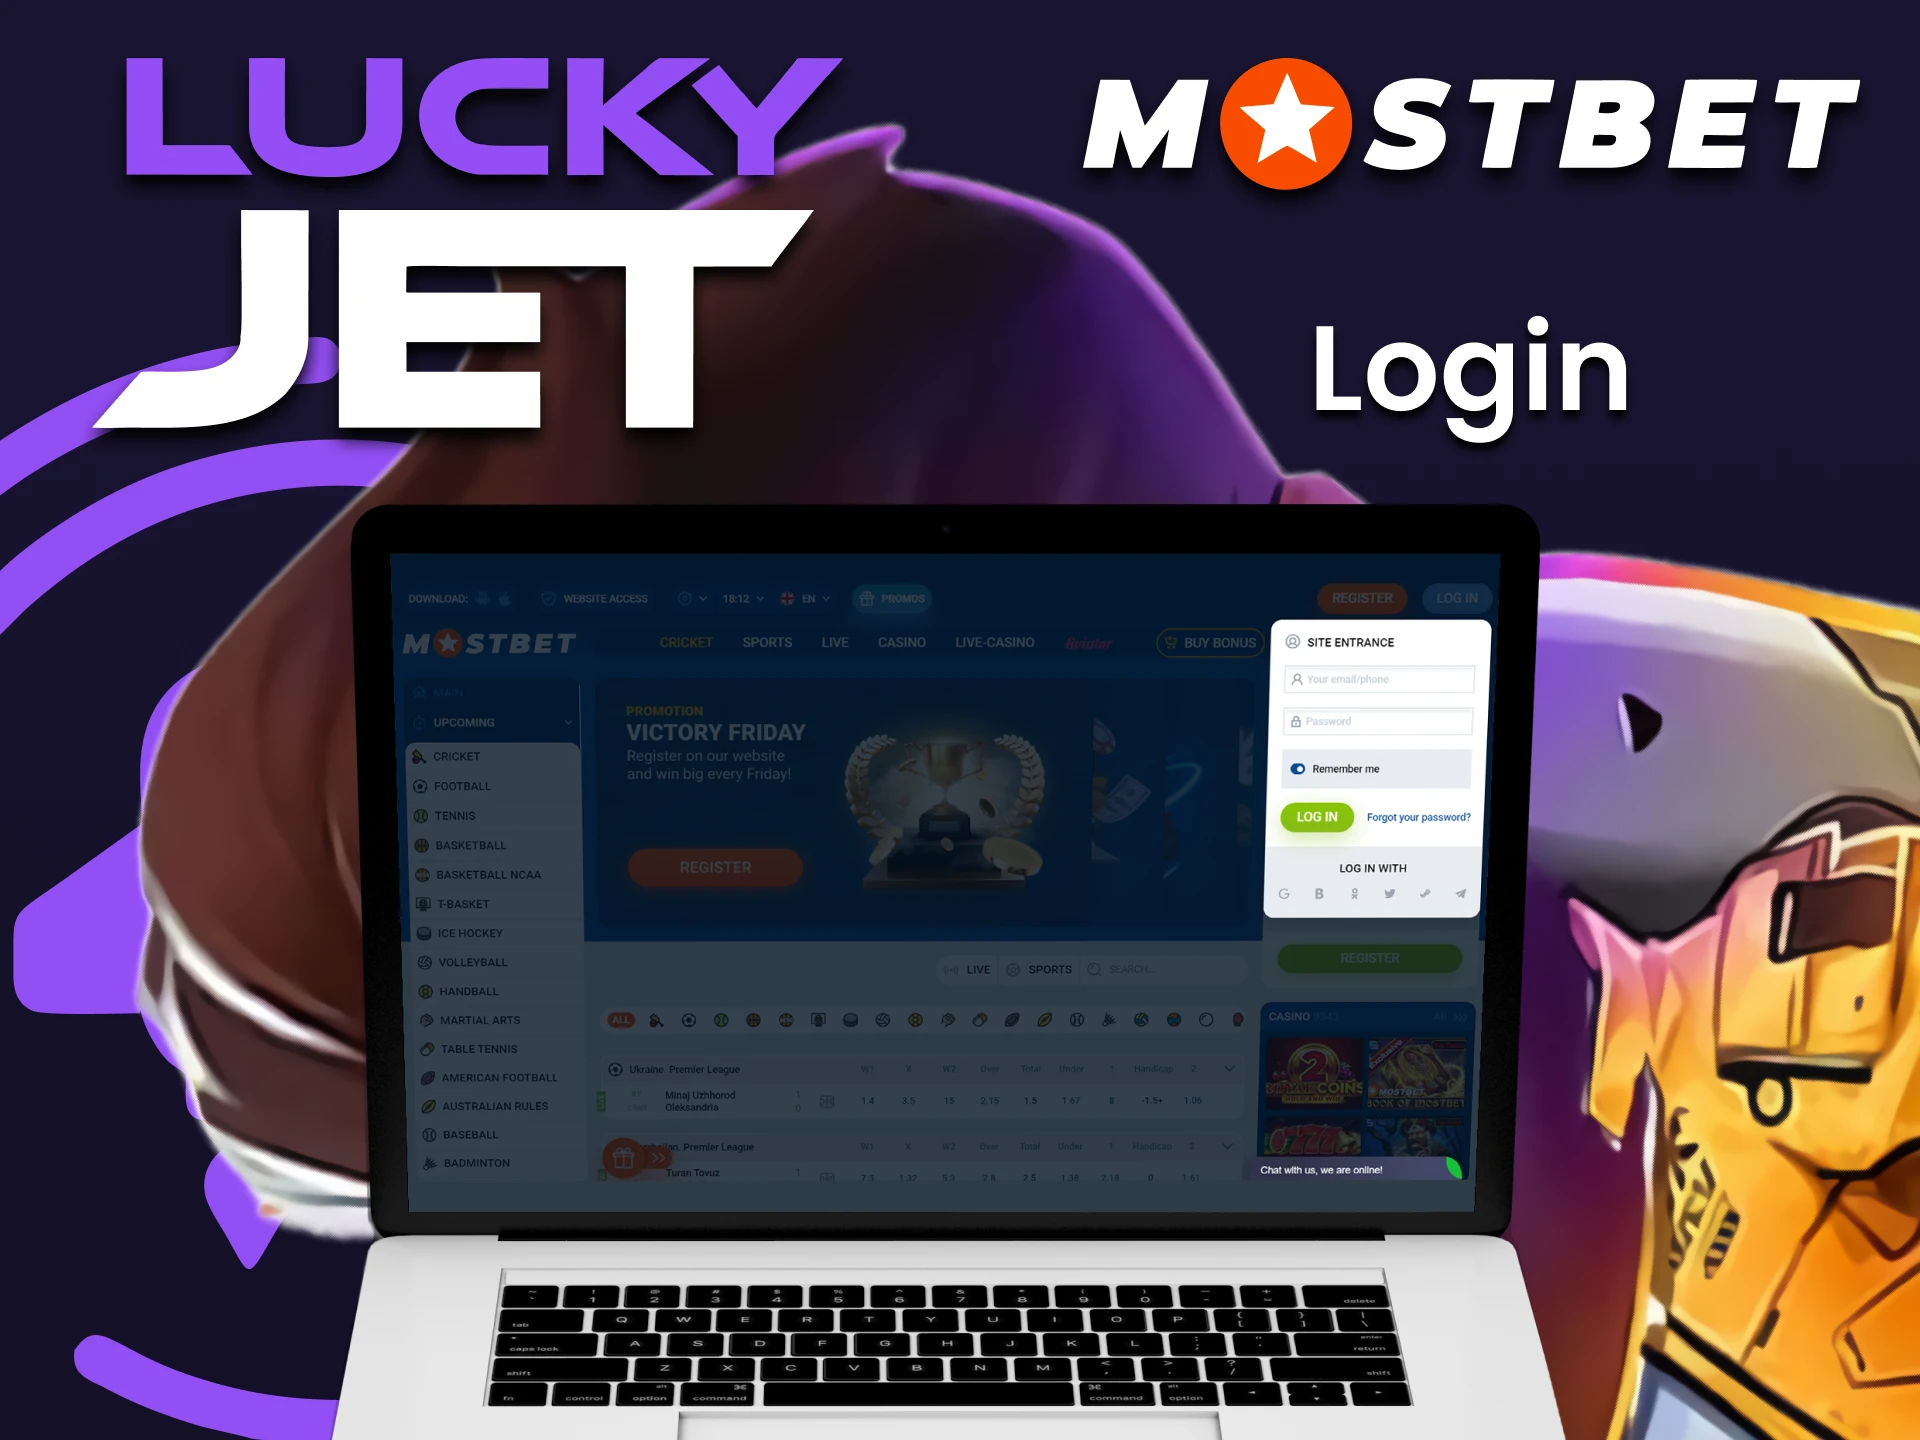 Logging into your personal Mostbet account will give you the opportunity to play Lucky Jet.